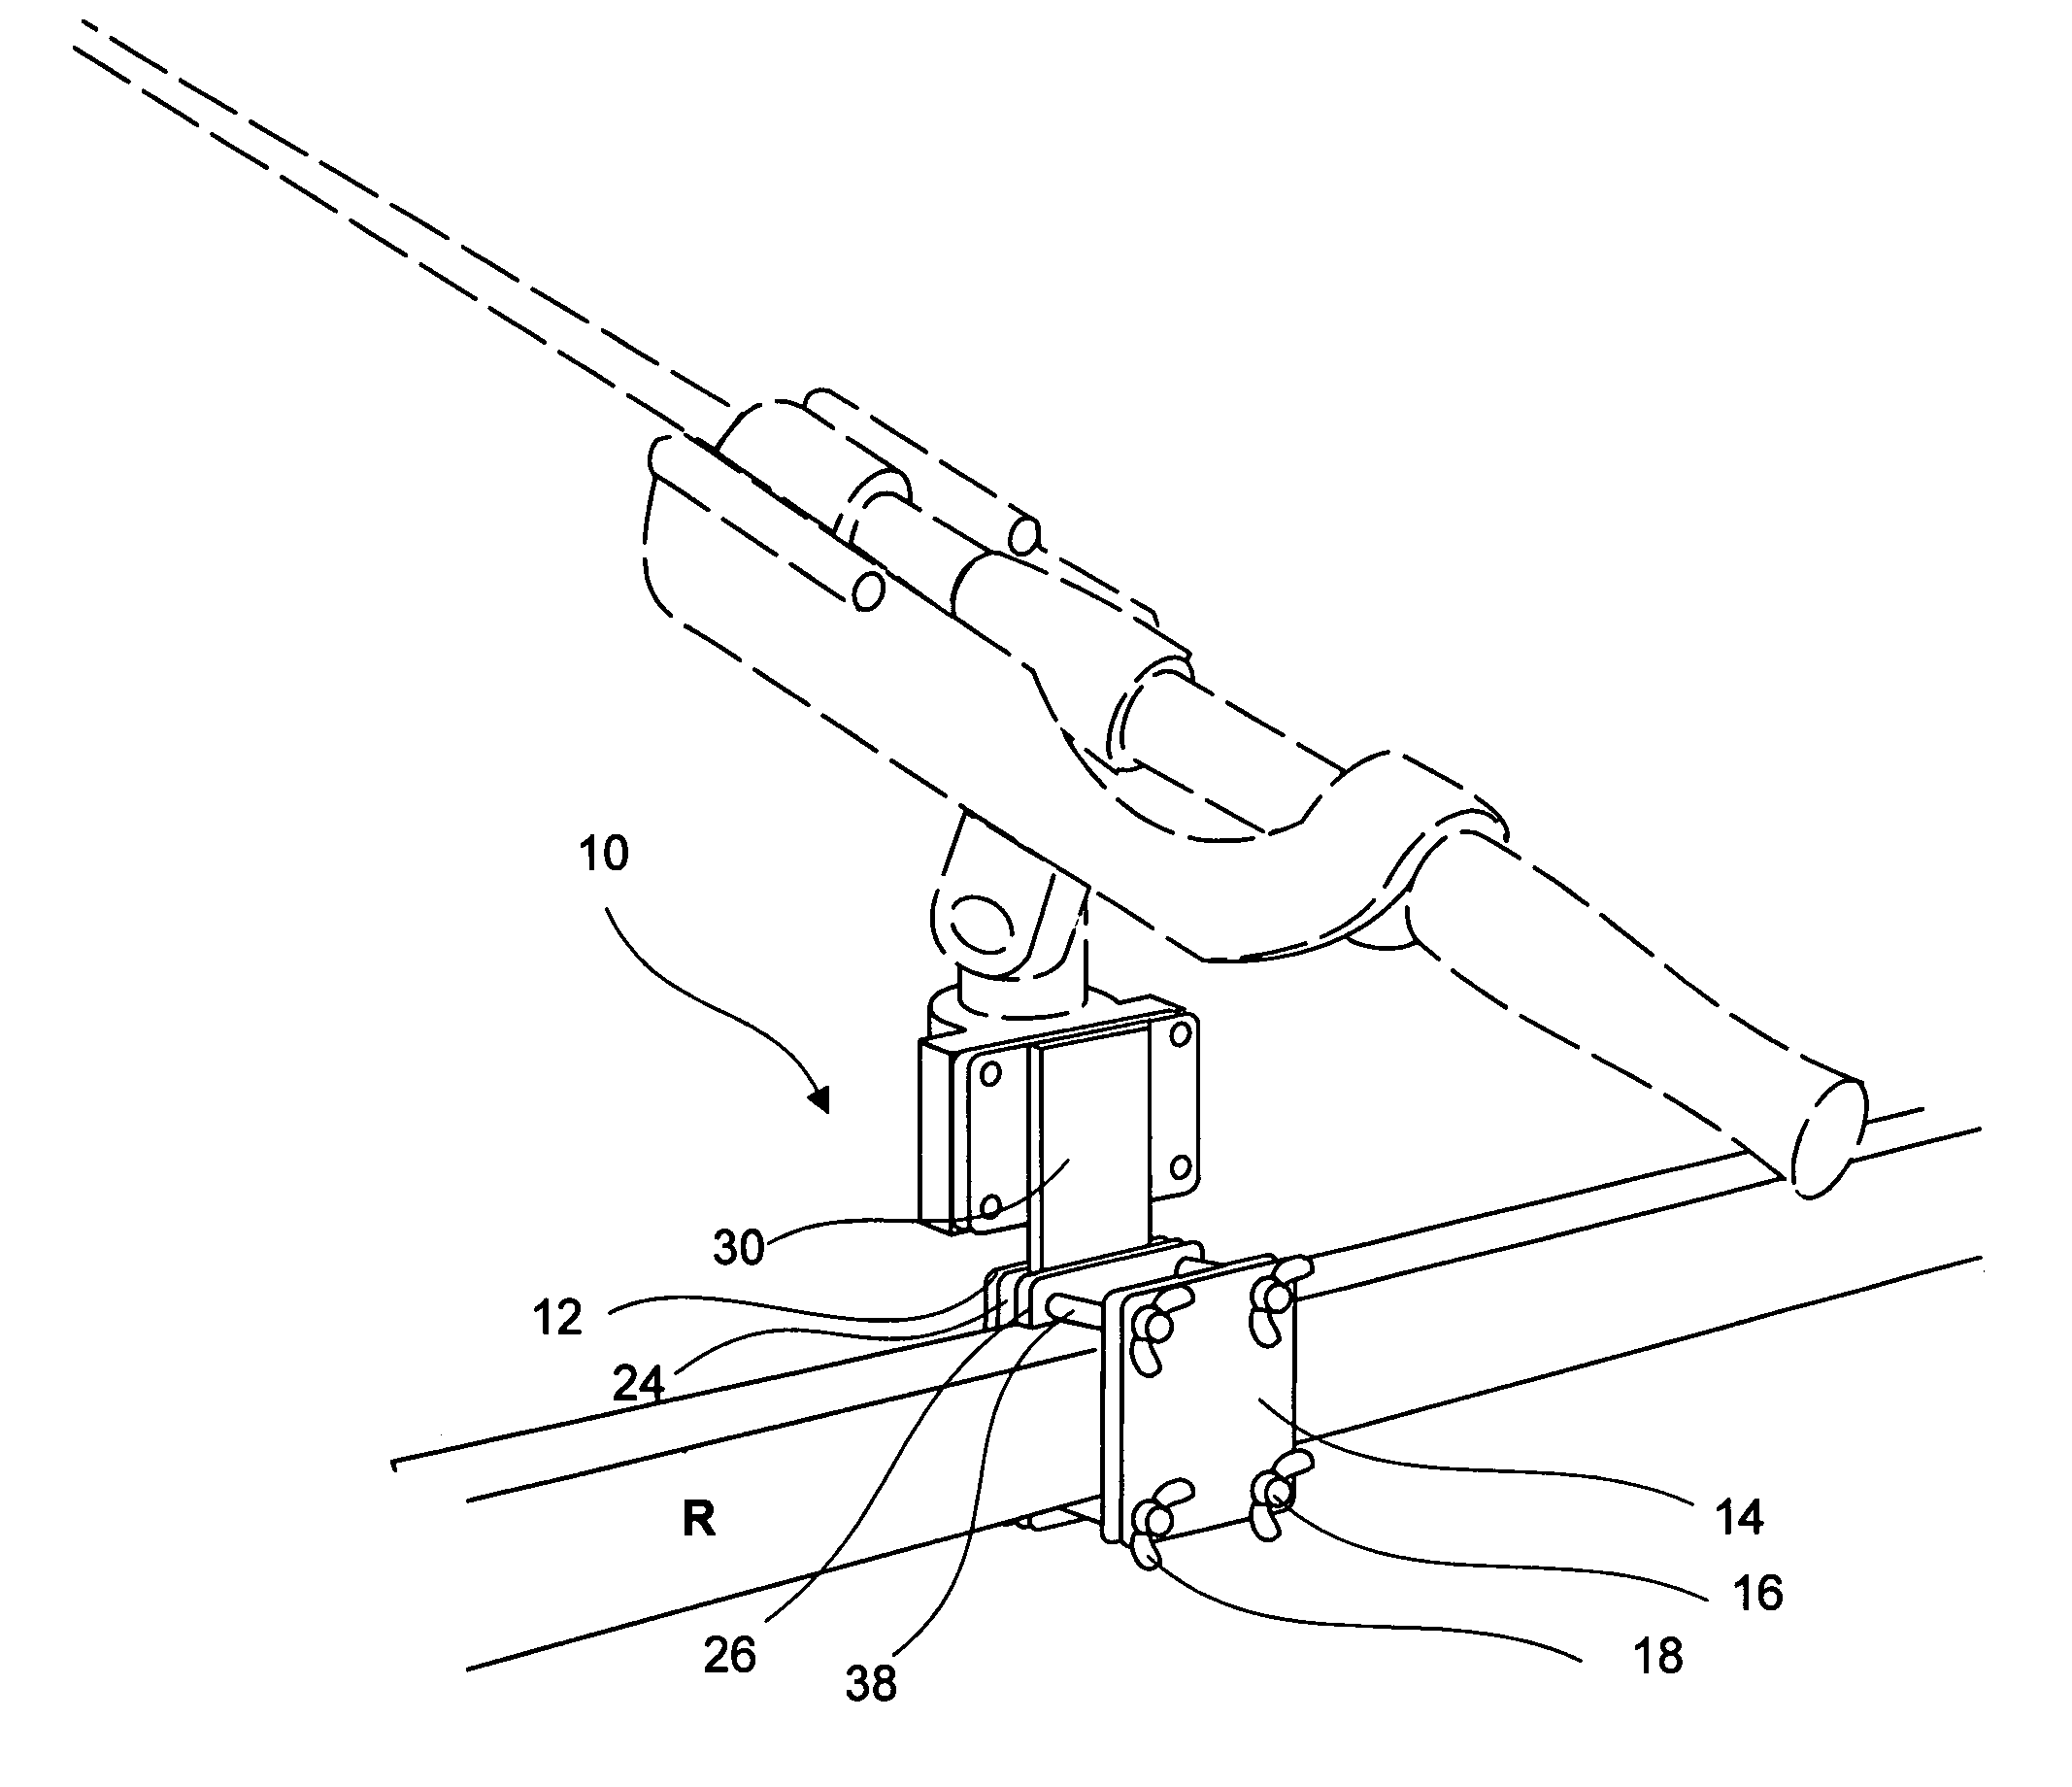 Bracket for holding accessories on a boat